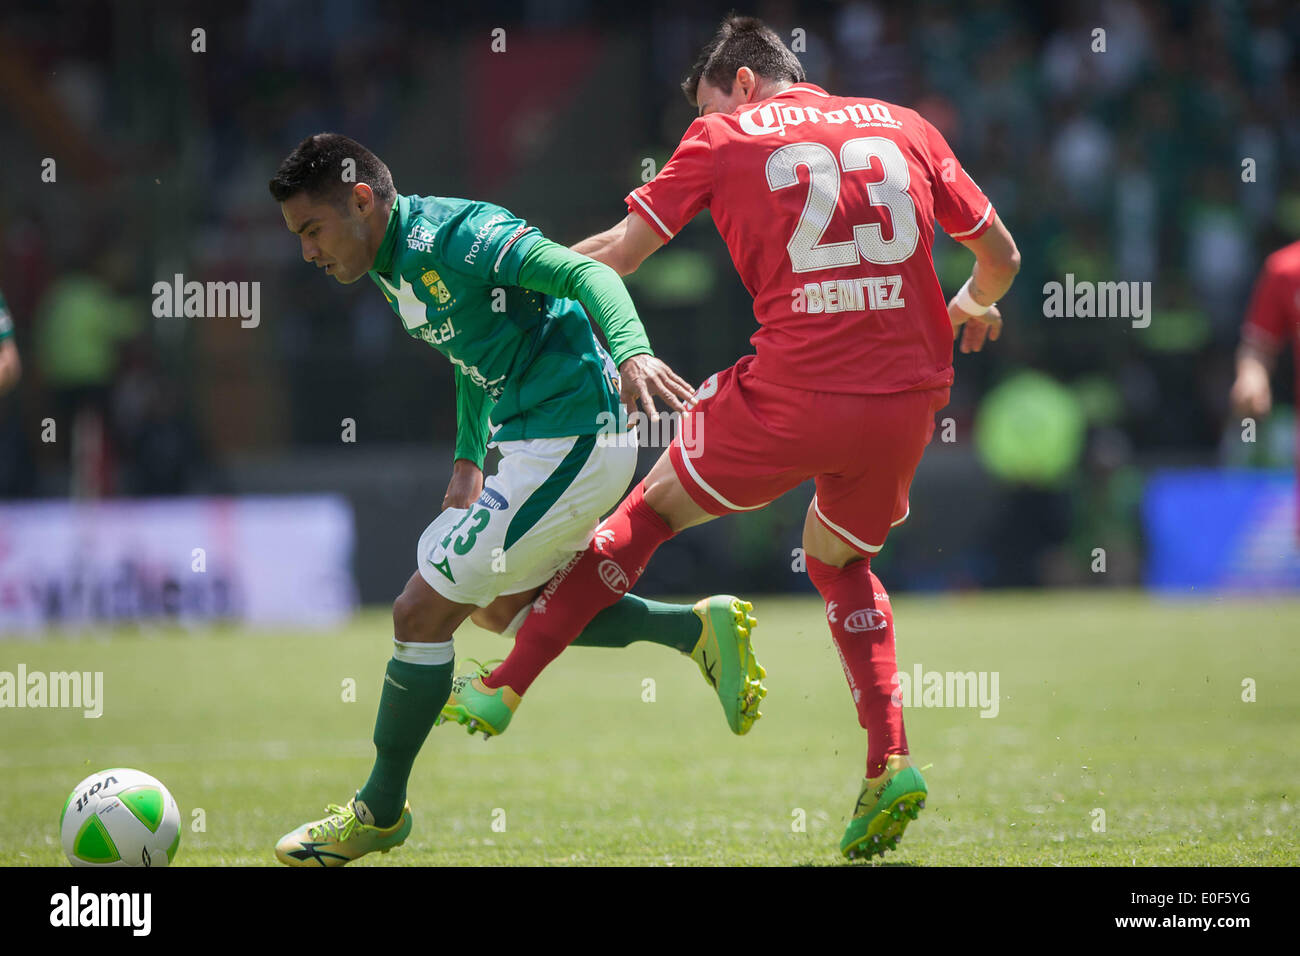 Toluca, Mexico. 11th May, 2014. Toluca's Edgar Benitez (R) vies for the ball with Juan Jose Vazquez of Leon during their second leg semifinal match of the Liga MX Closing Tournament at Nemesio Diez Stadium in Toluca, State of Mexico, Mexico, on May 11, 2014. Leon won 1-0 and entered the final by 2-0 on aggregate. © Pedro Mera/Xinhua/Alamy Live News Stock Photo